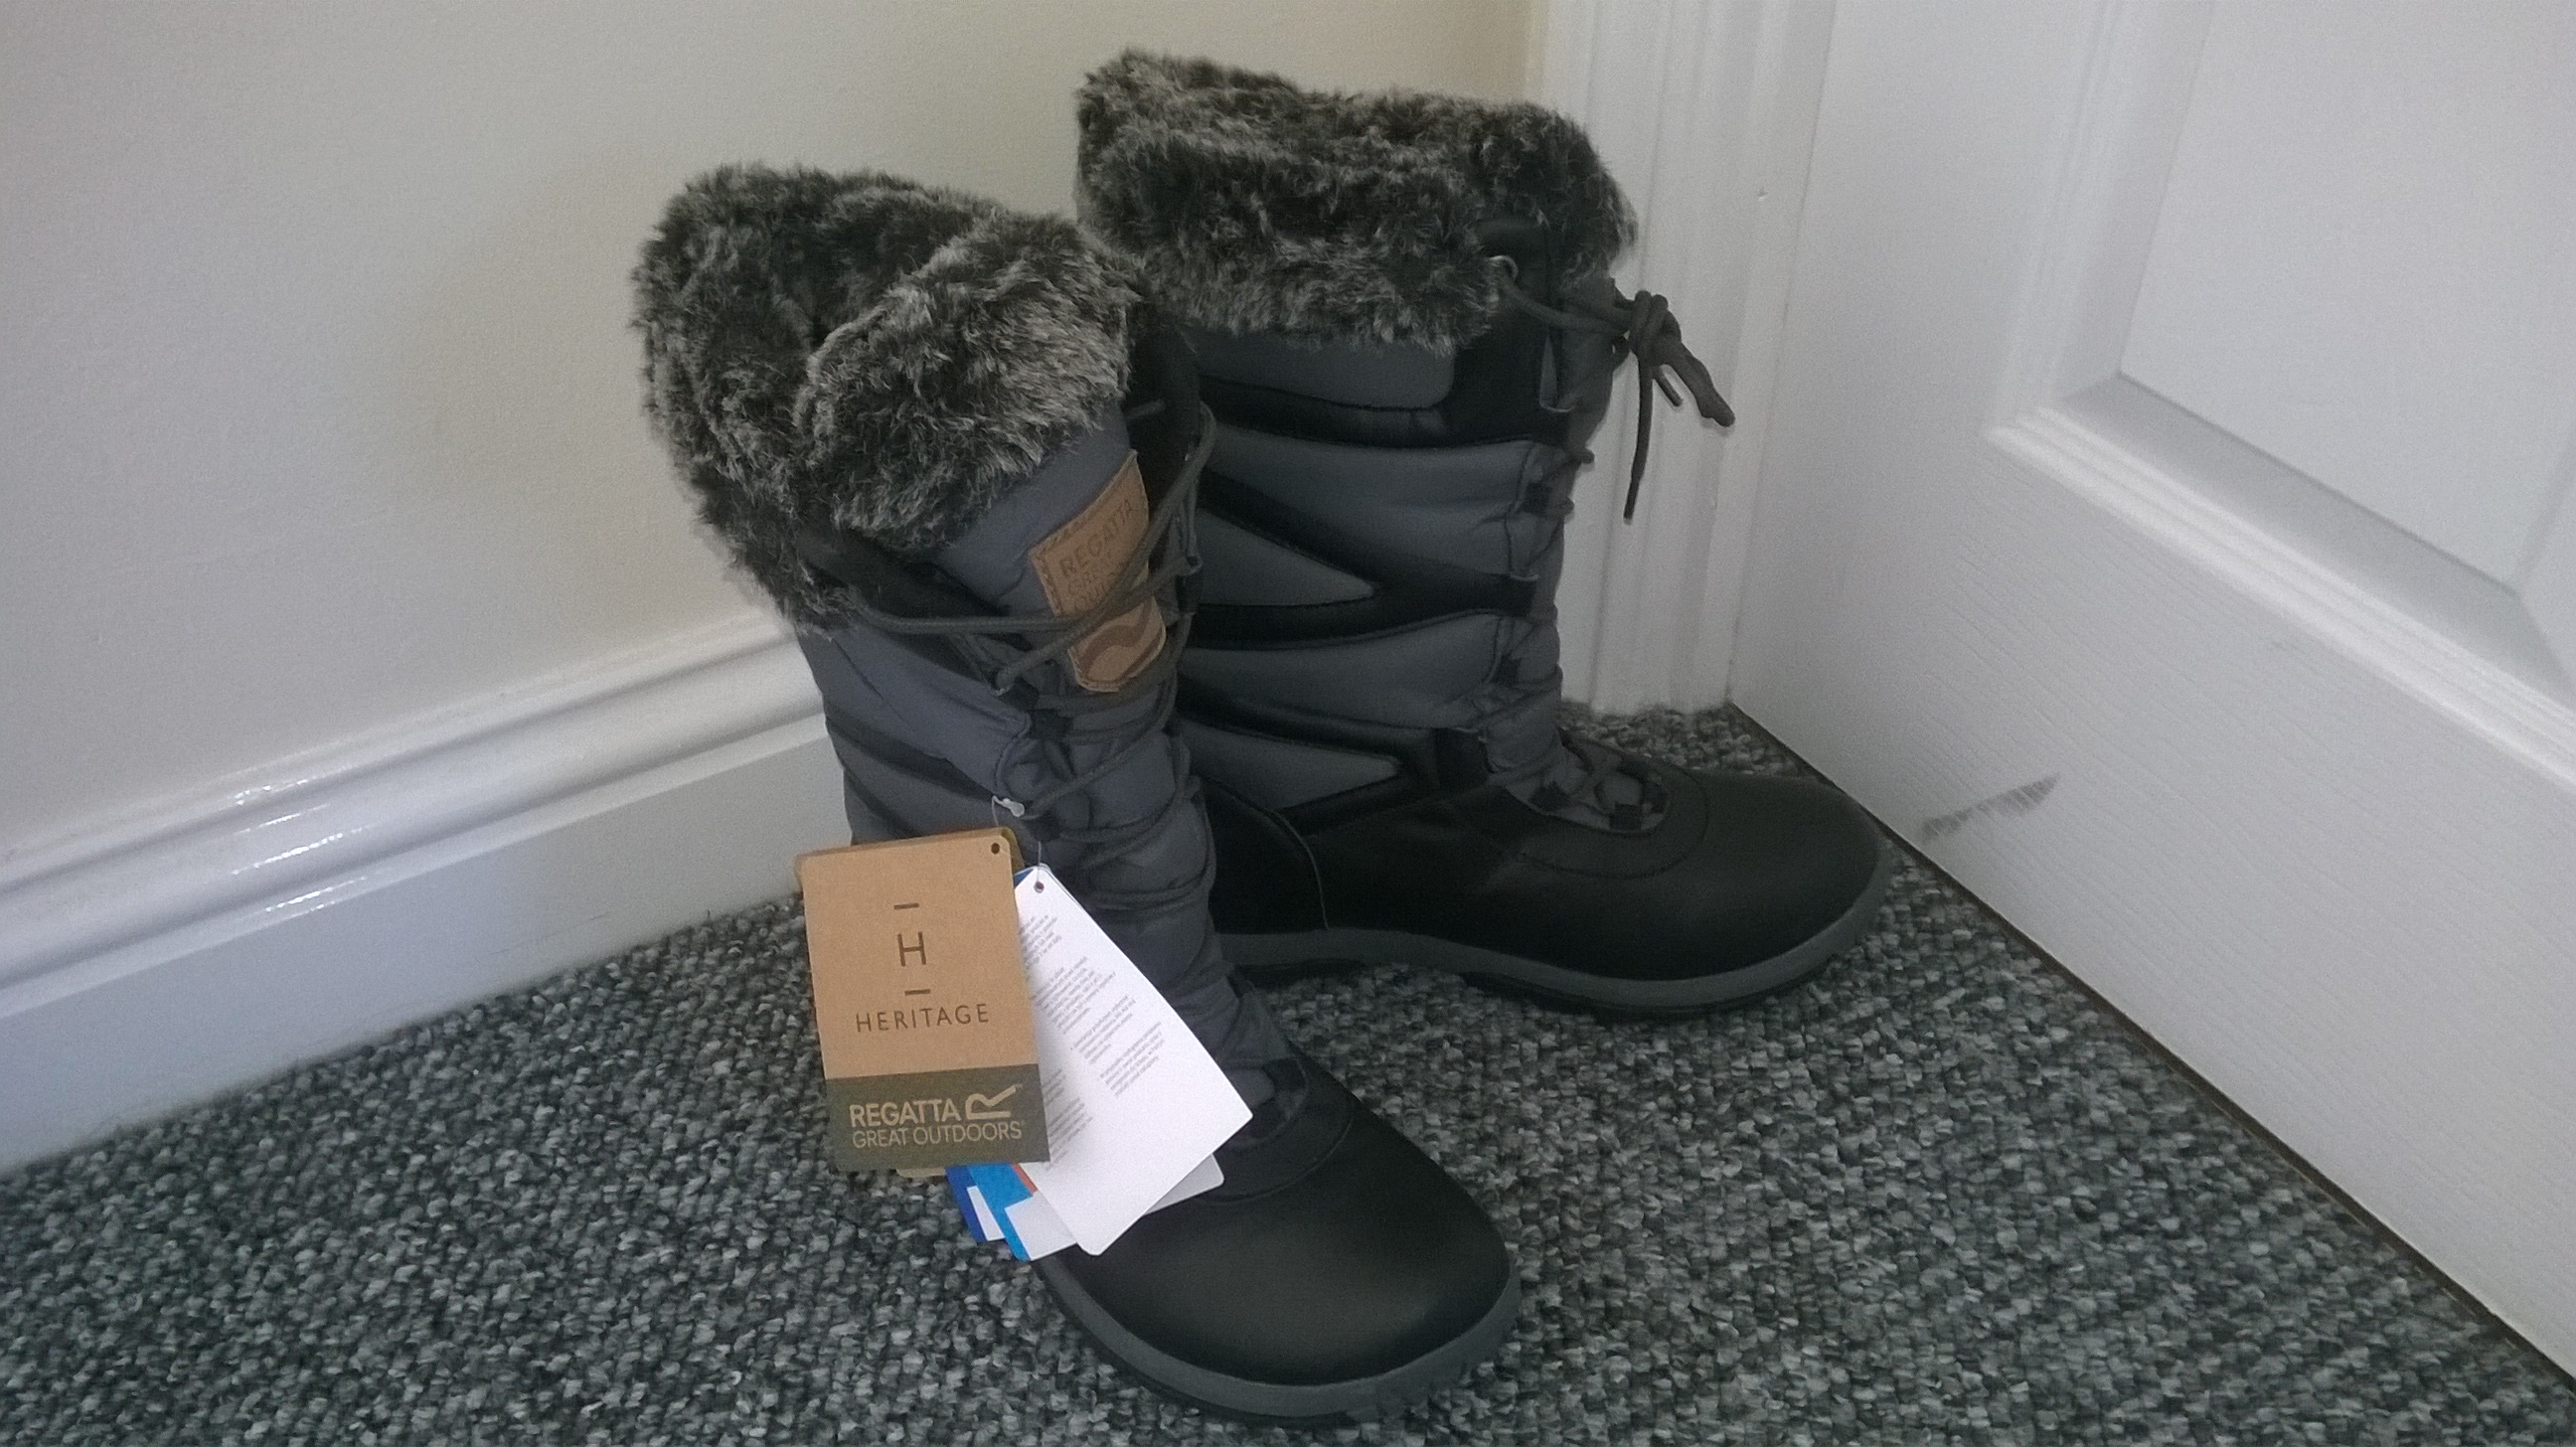 Baffin Impact snow boots expected. "Counterfeit" Regatta Lady Dalten snow boots received!